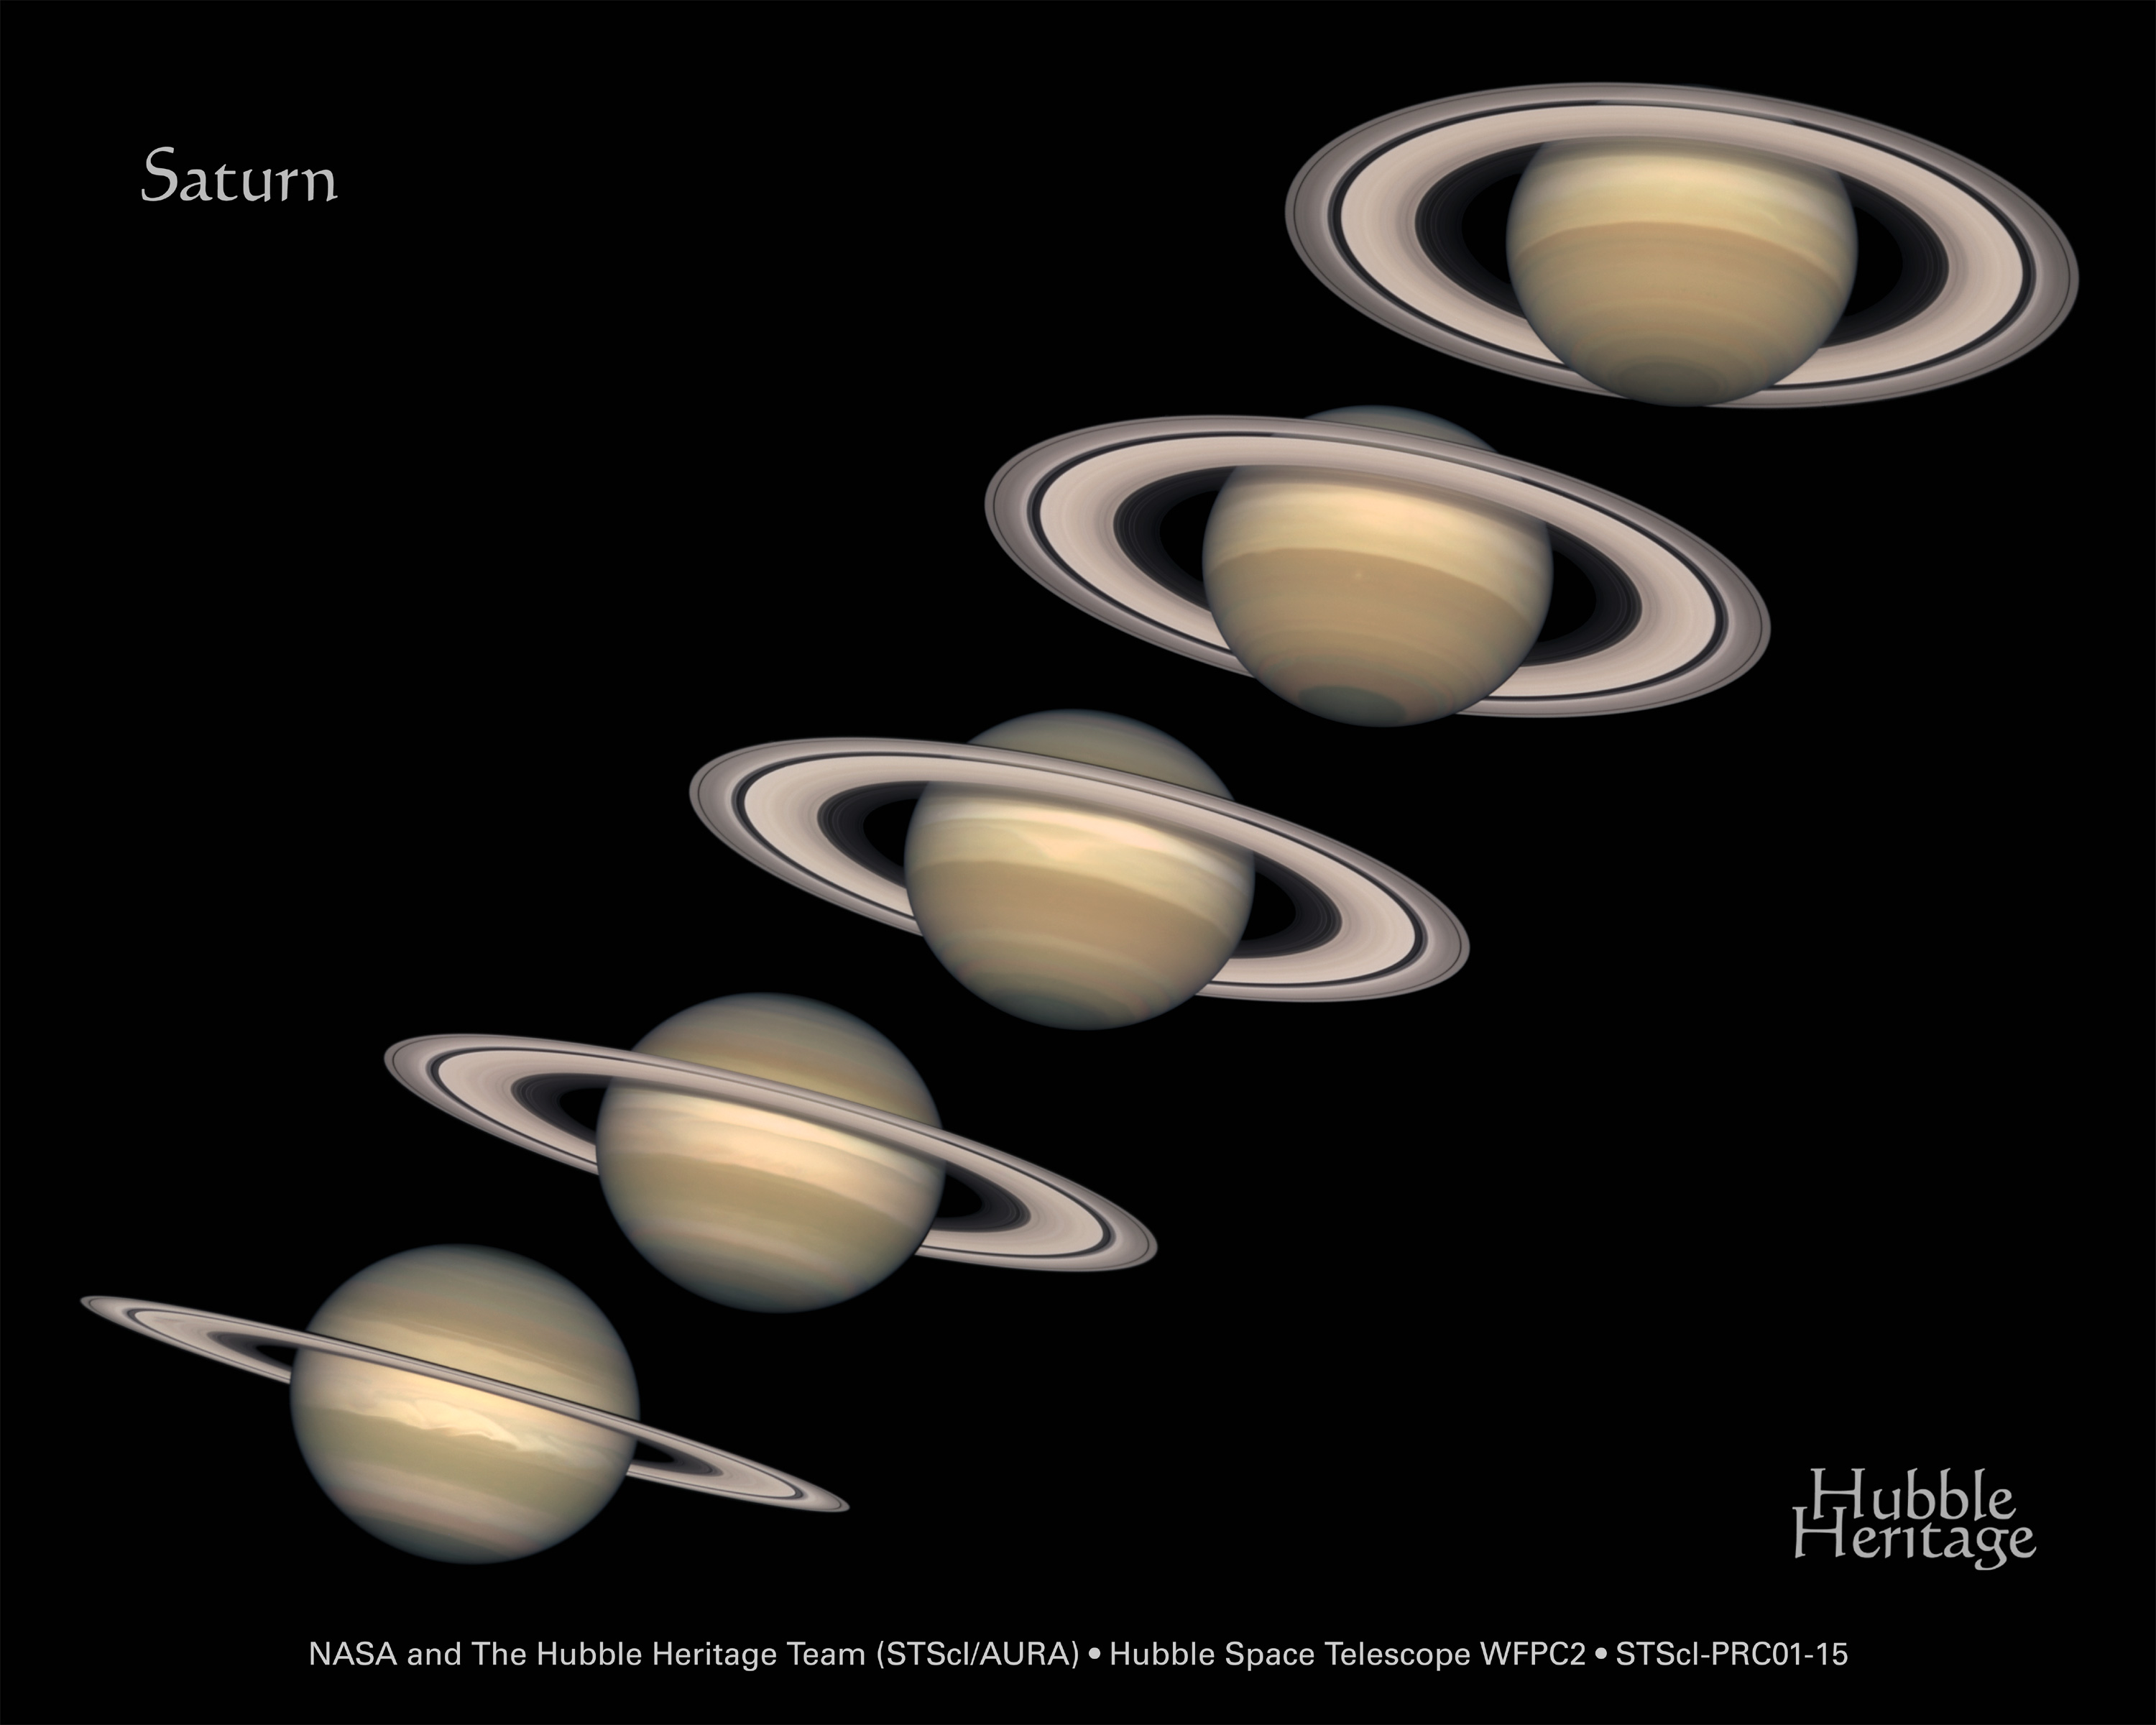 17 of the most fascinating moons of Saturn